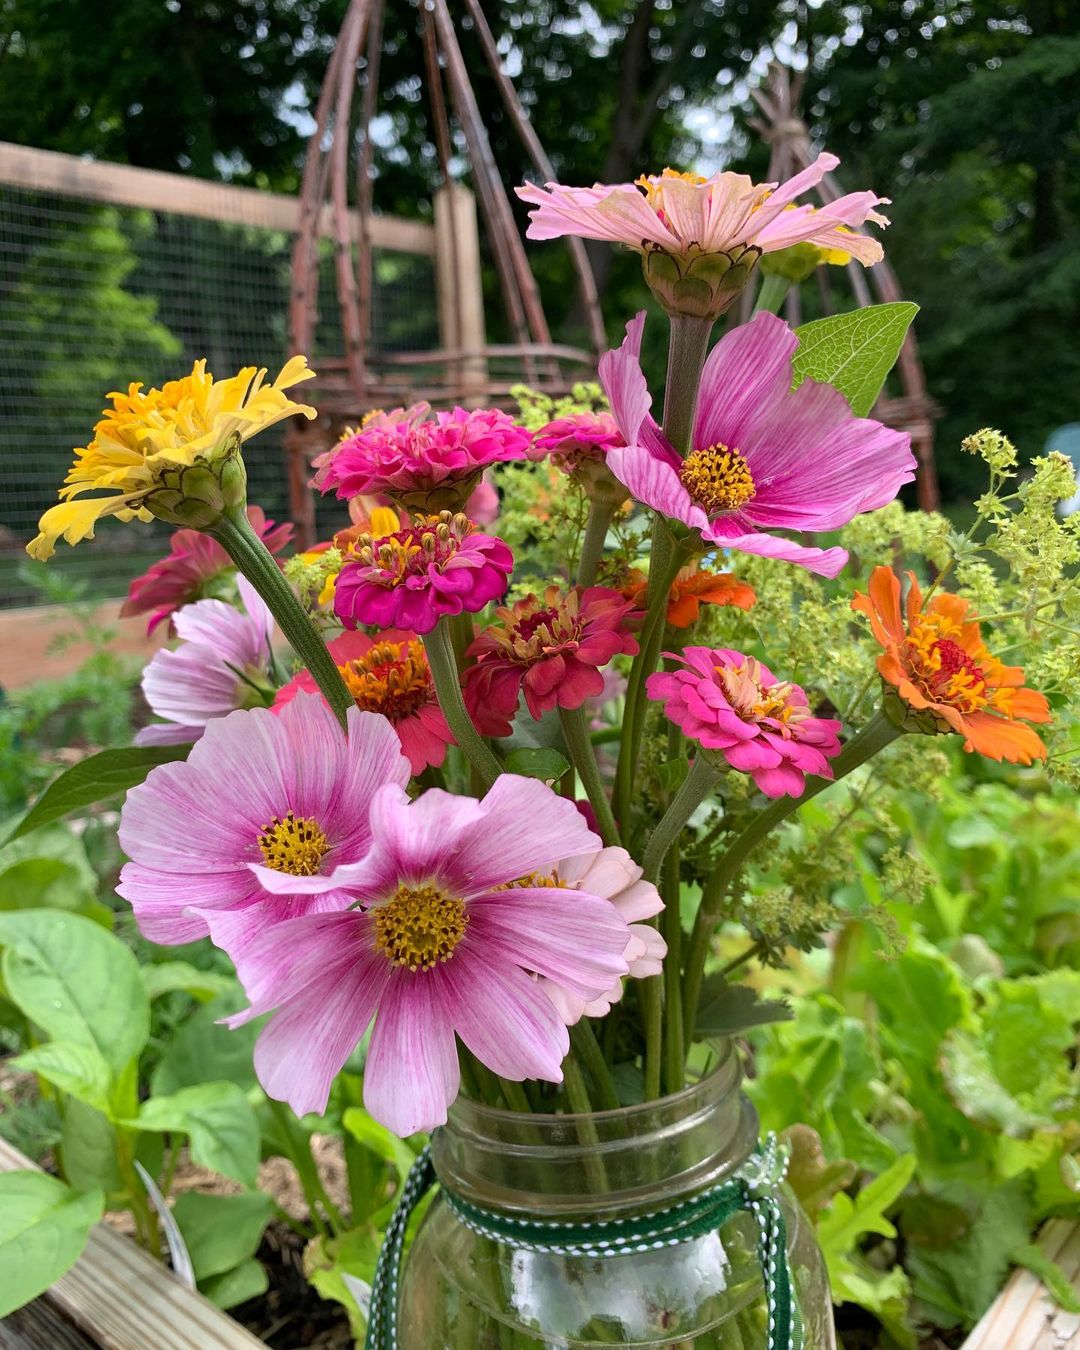 Annual flowers put inside a mason jar in the middle of a lush garden. Photo by instagram user @peggygarbus